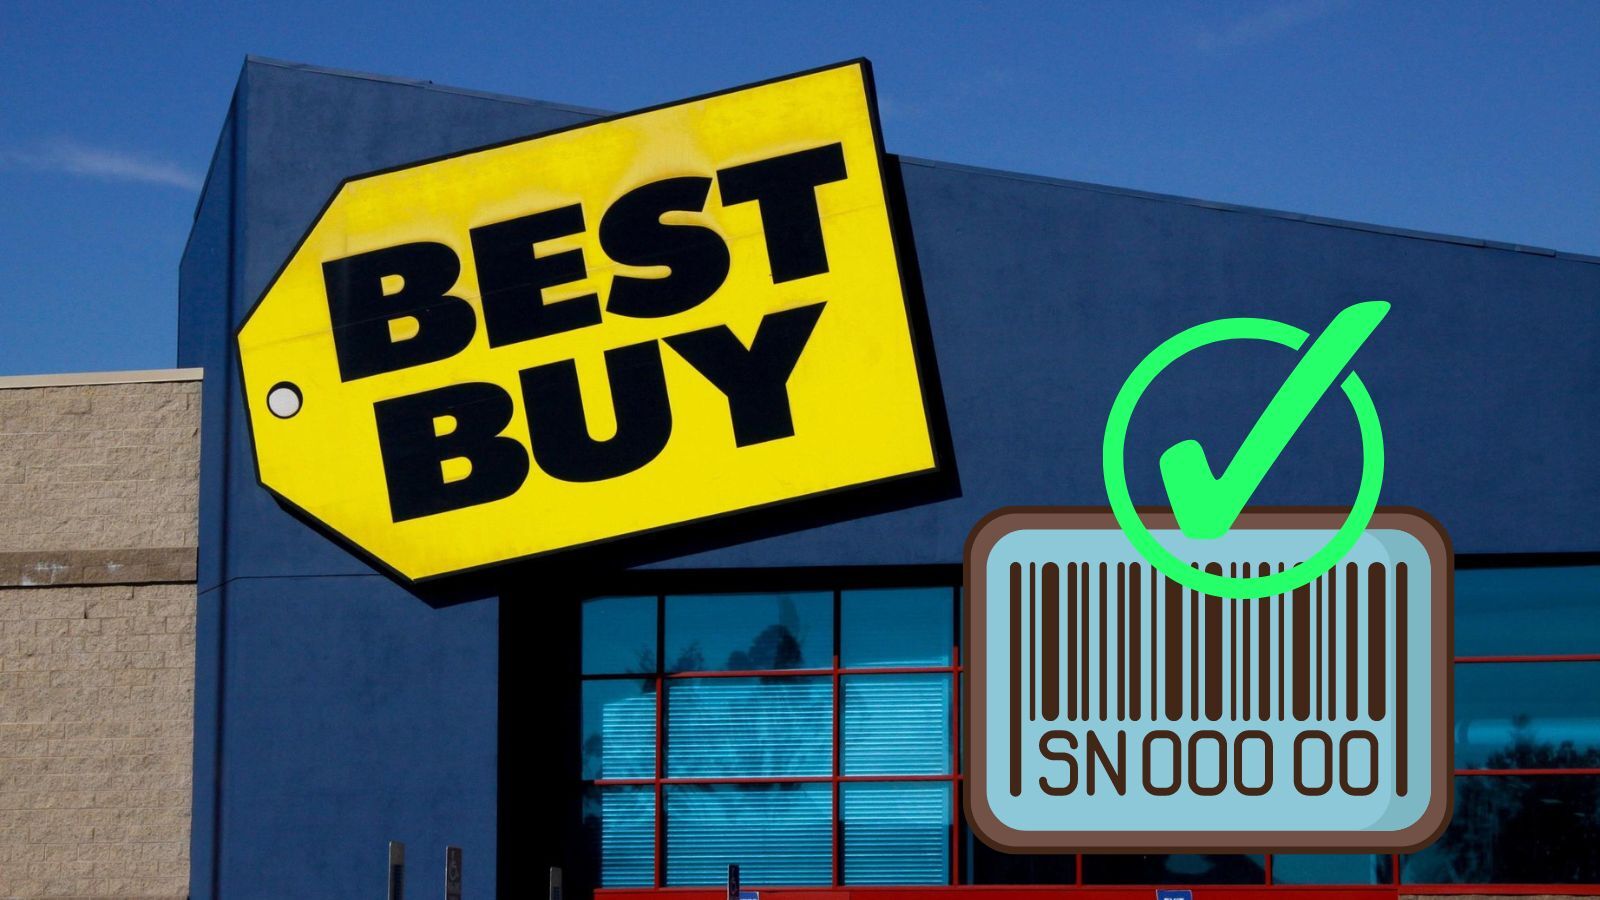 Does Best Buy Check Serial Numbers? (That's What You Must Know)